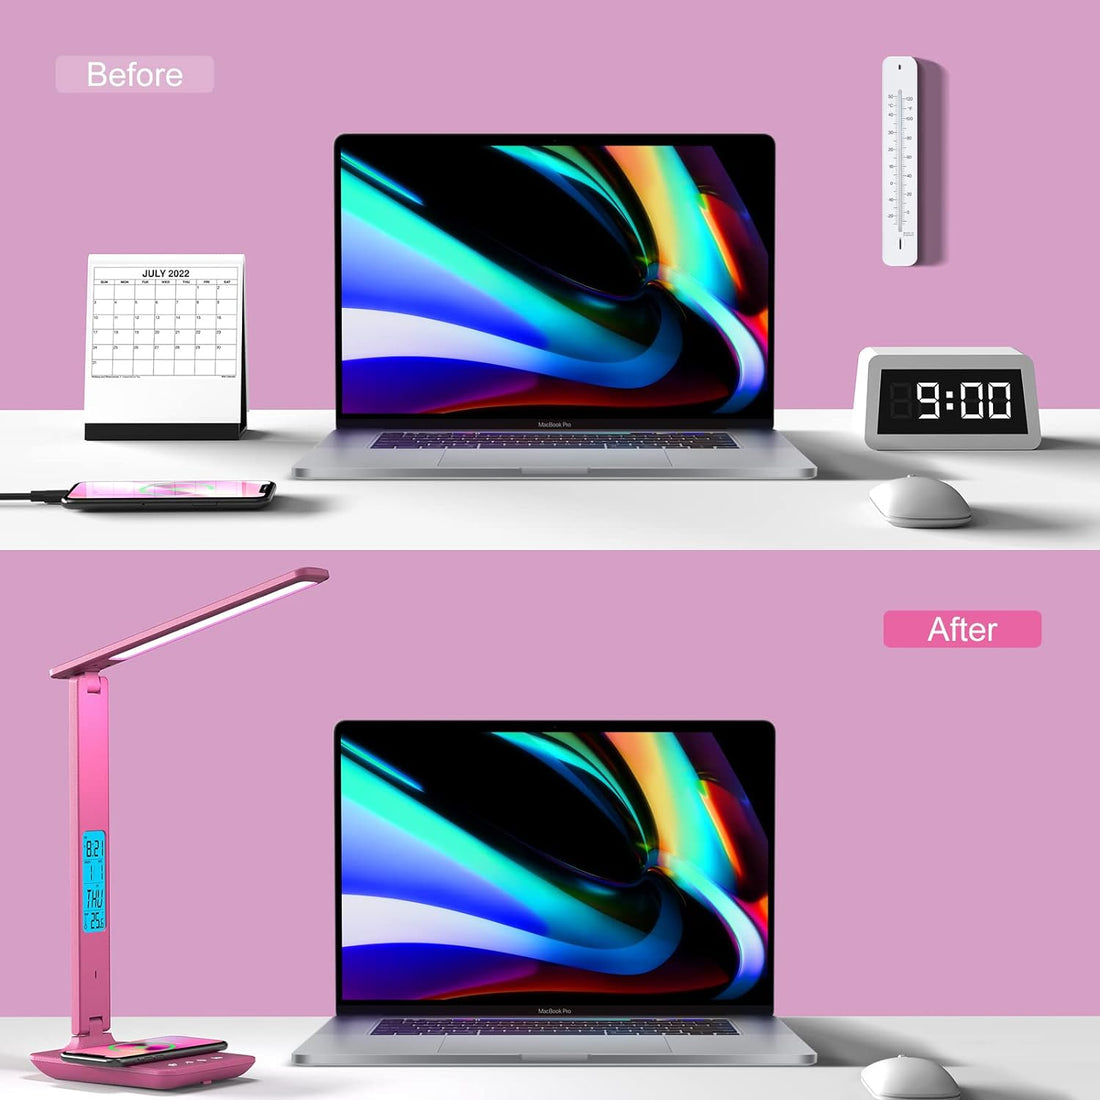 poukaran Desk Lamp, LED Desk Lamp with Wireless Charger, USB Charging Port, Table Lamp with Clock, Alarm, Date, Temperature, Office Lamp, Desk Lamps for Home Office, Pink